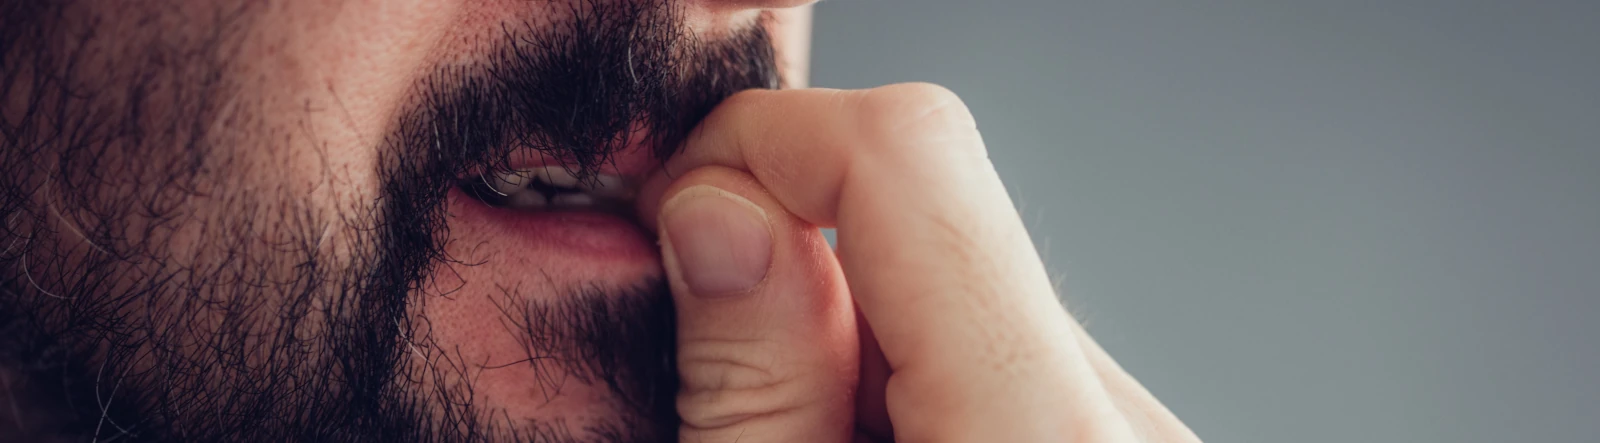 The lower half of the face of a bearded man biring his fingernails